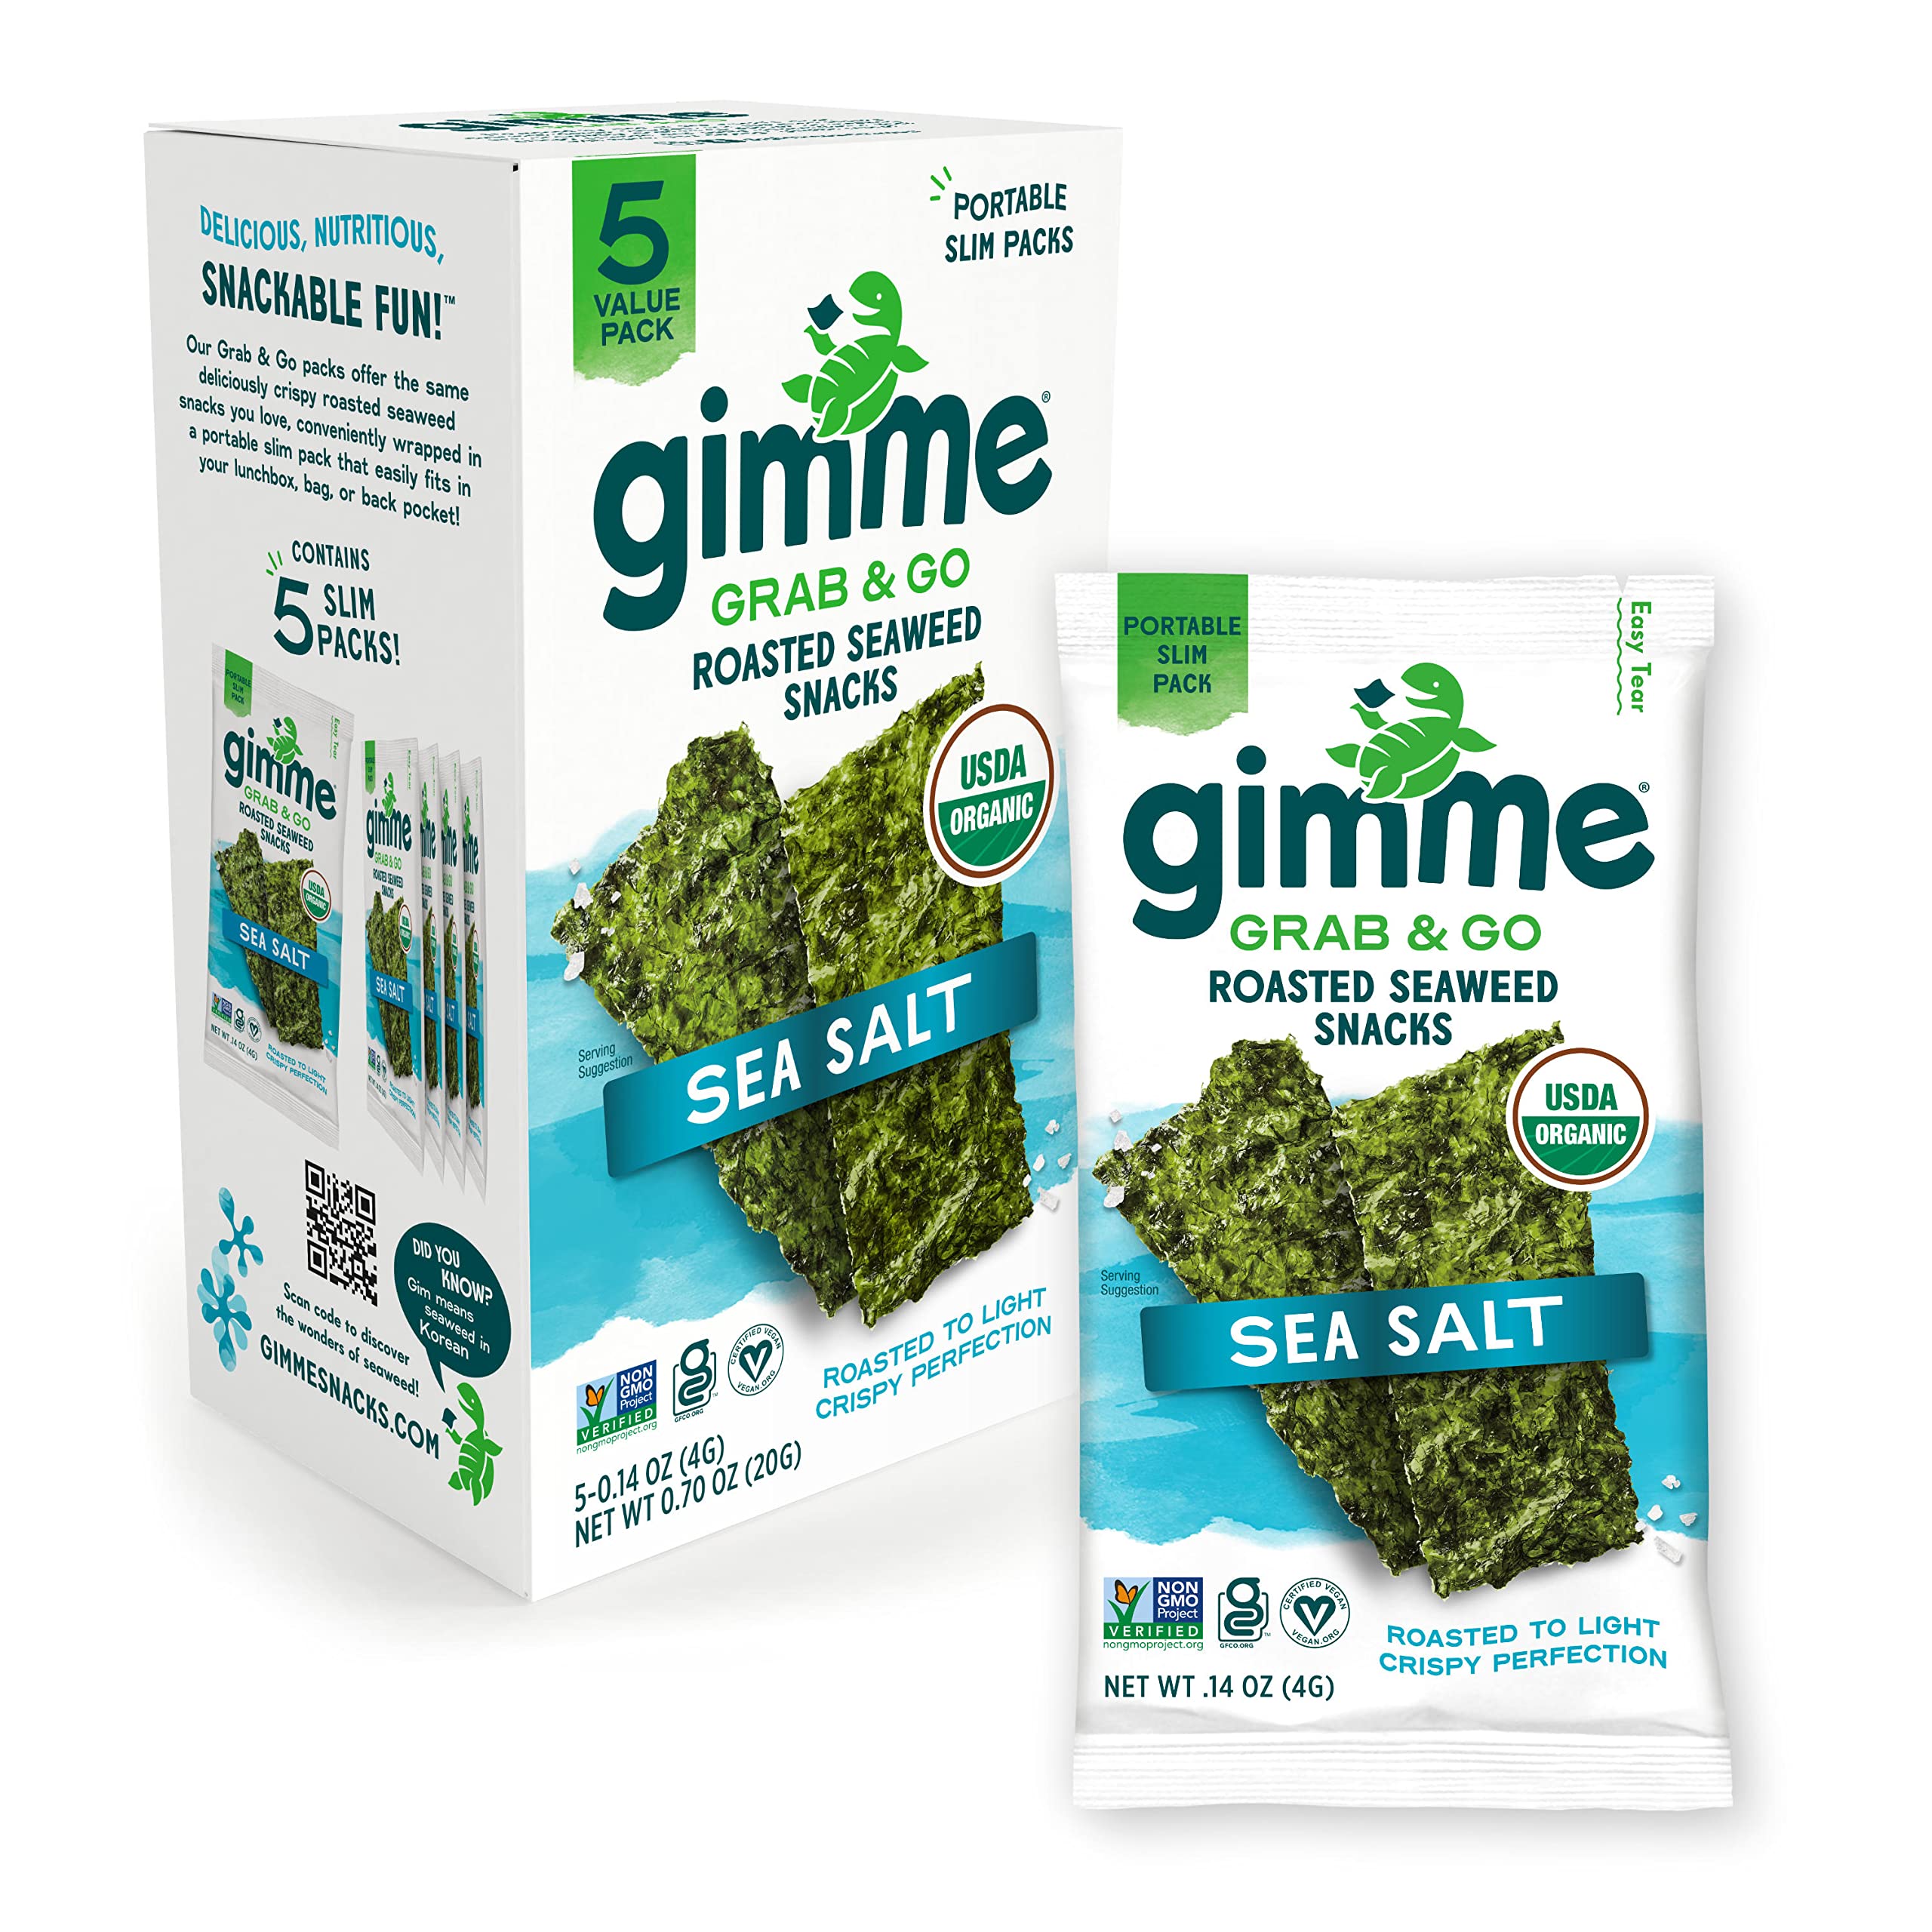 gimMe Grab & Go - Sea Salt - 5 Count - Organic Roasted Seaweed Sheets - Keto Vegan Gluten Free - Great Source of Iodine & Omega 3’s - Healthy On-The-Go Snack for Kids Adults $2.42